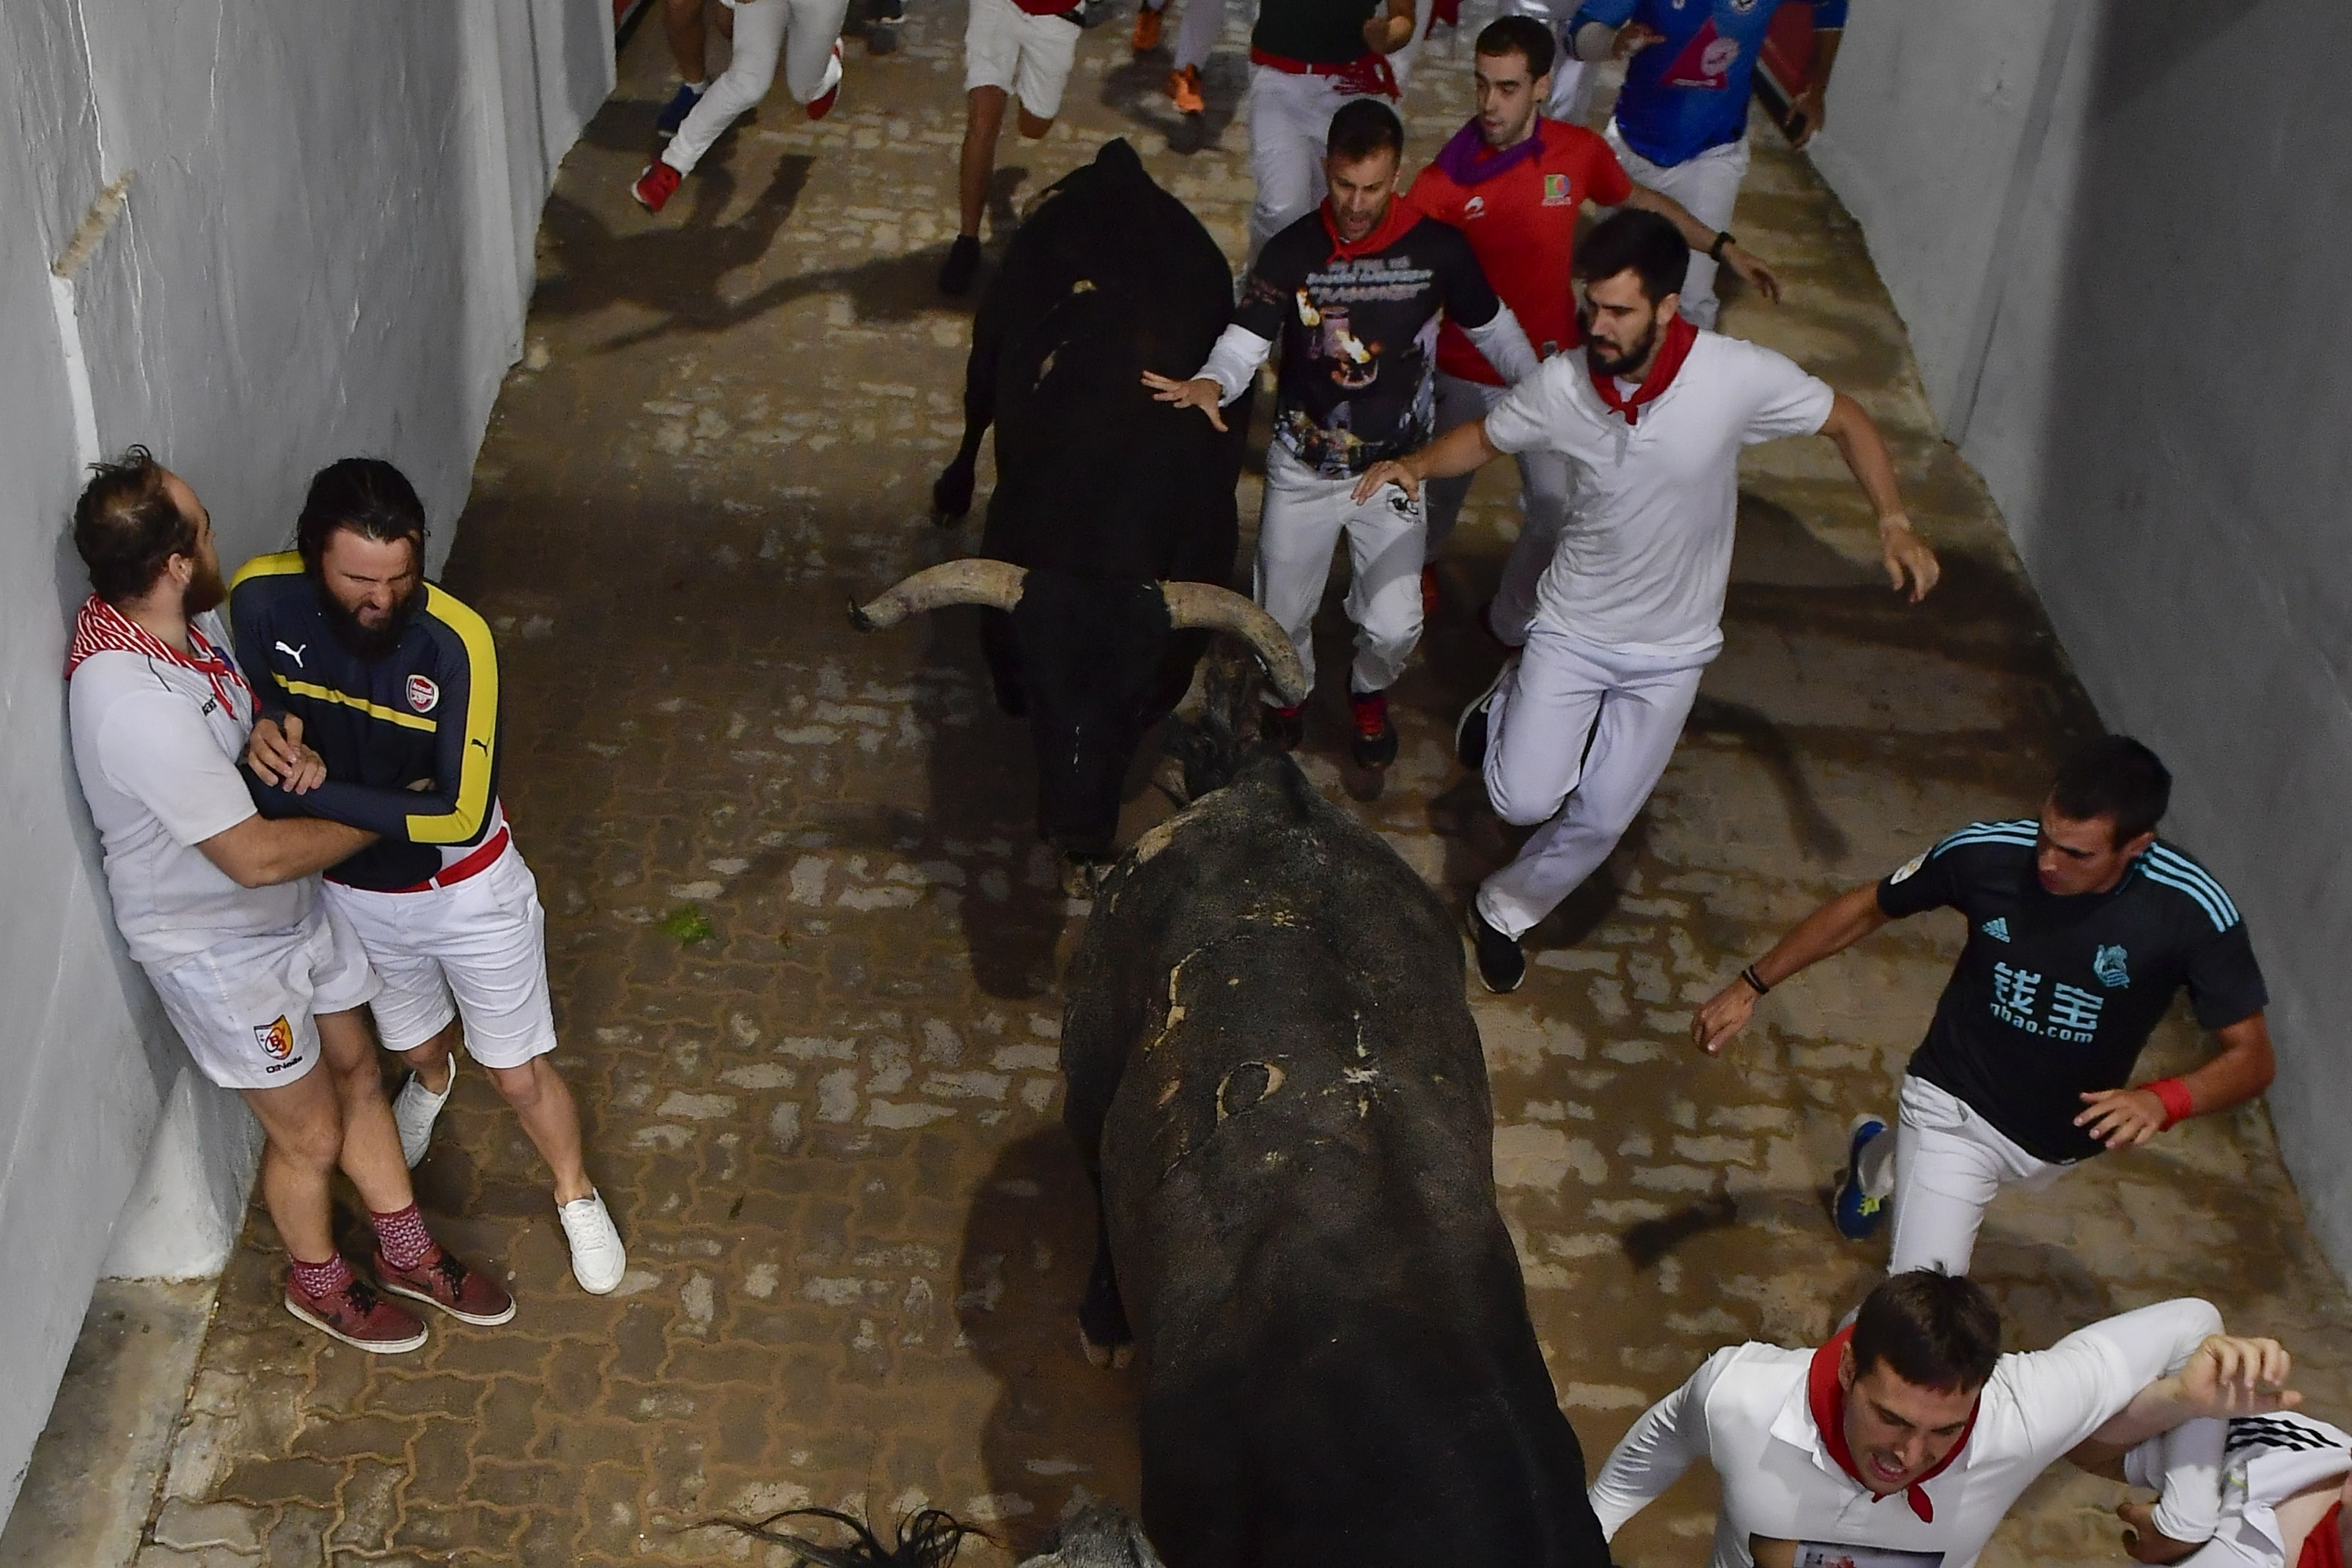 Revellers run next to fighting bulls during the running of the bulls at the San Fermin Festival, in Pamplona, northern Spain, Sunday, July 14, 2019. The San Fermin fiesta made internationally famous by Ernest Hemingway in his novel 